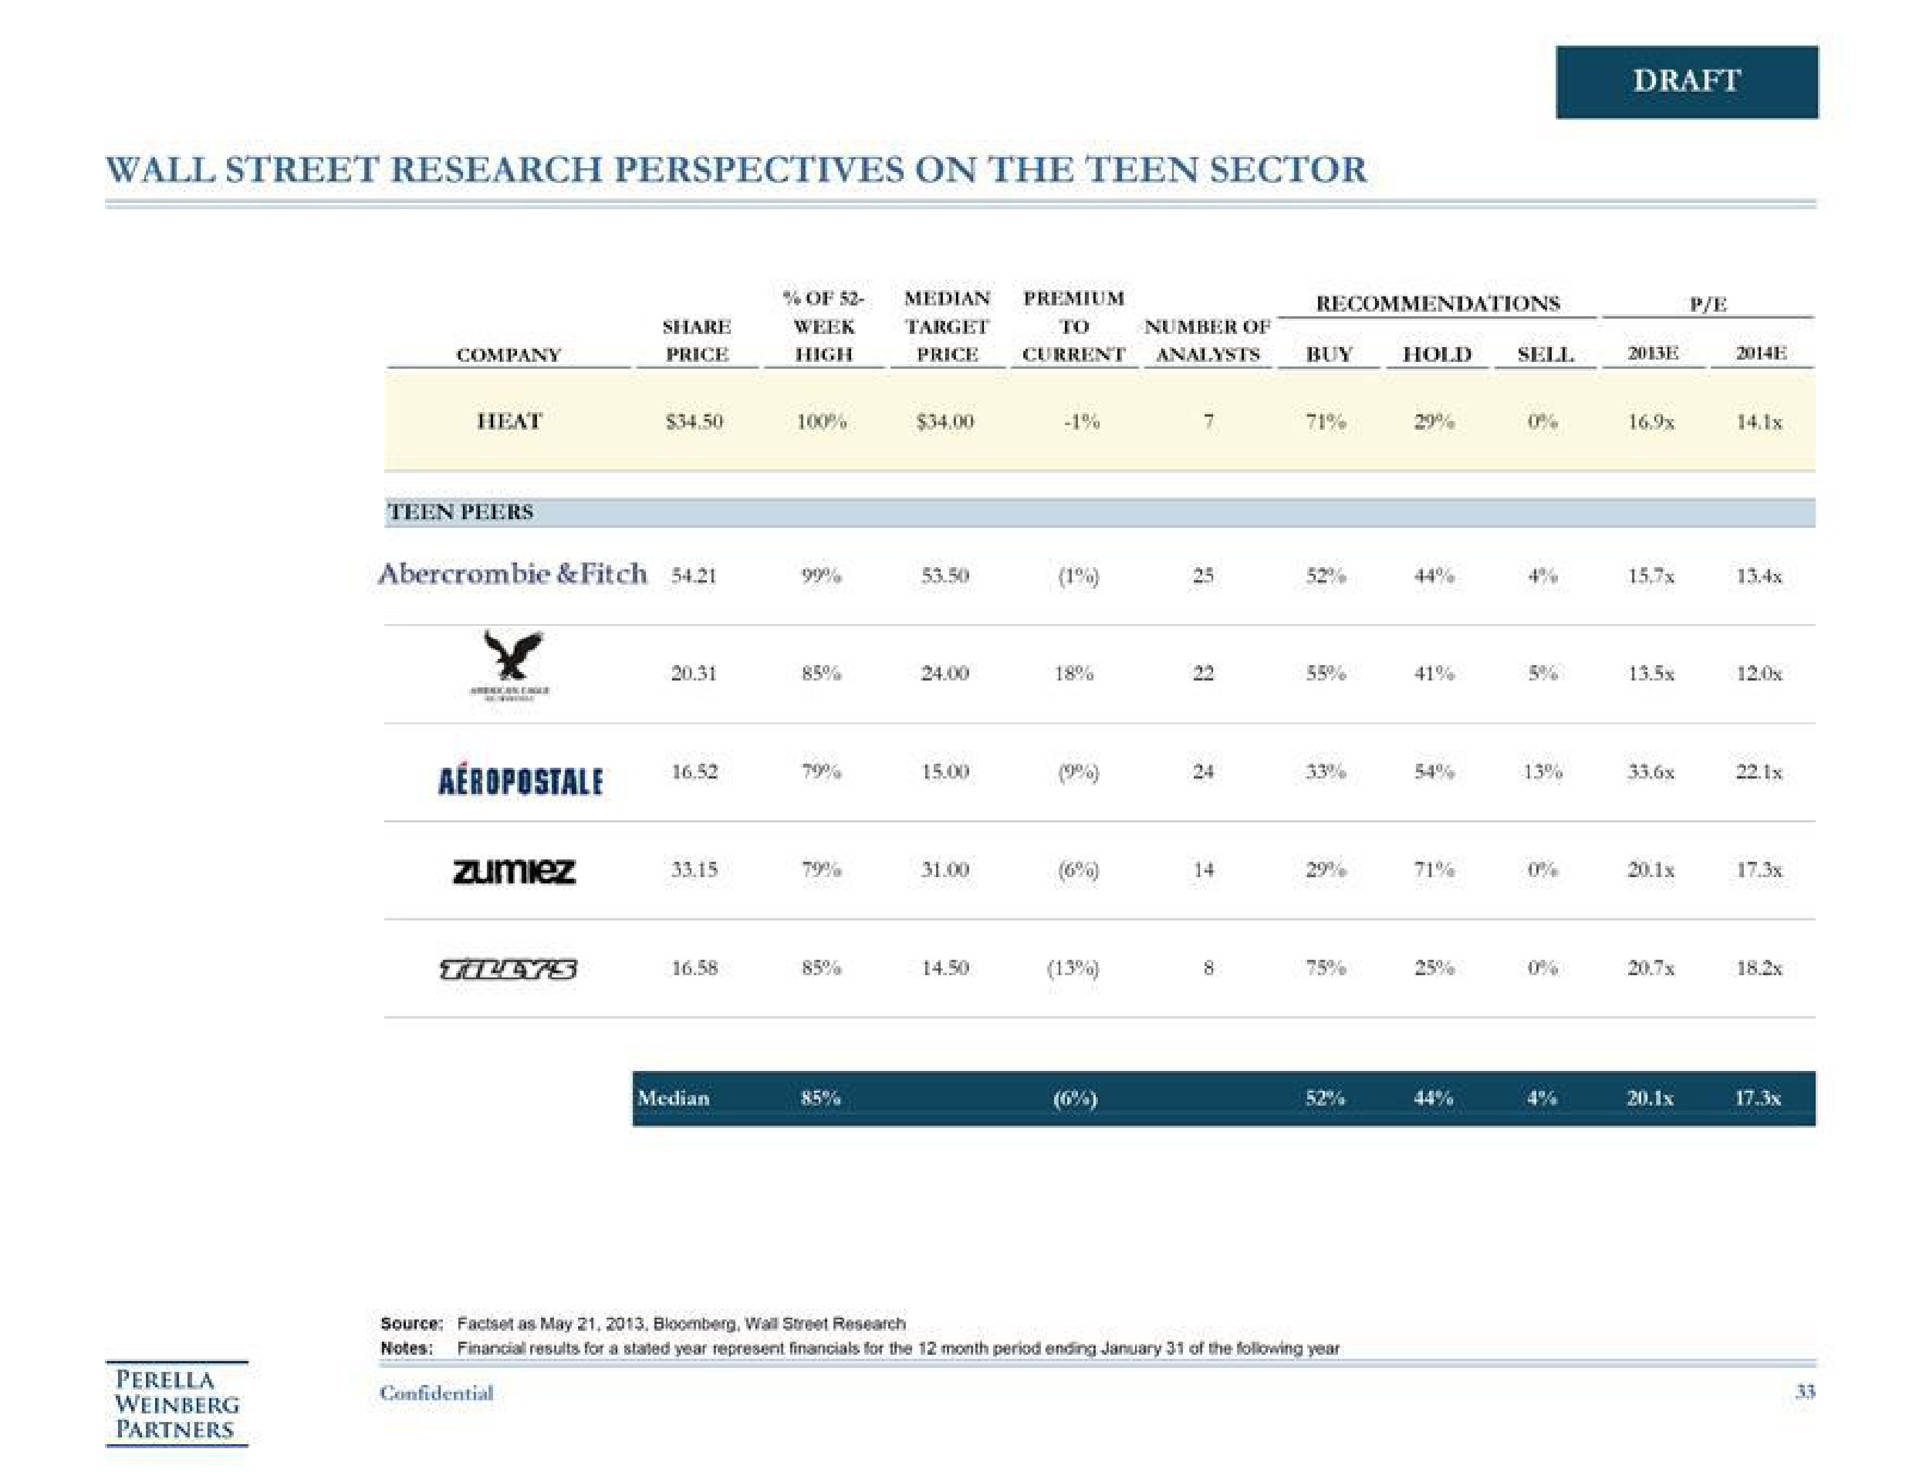 wall street research perspectives on the teen sector draft a ire | Perella Weinberg Partners